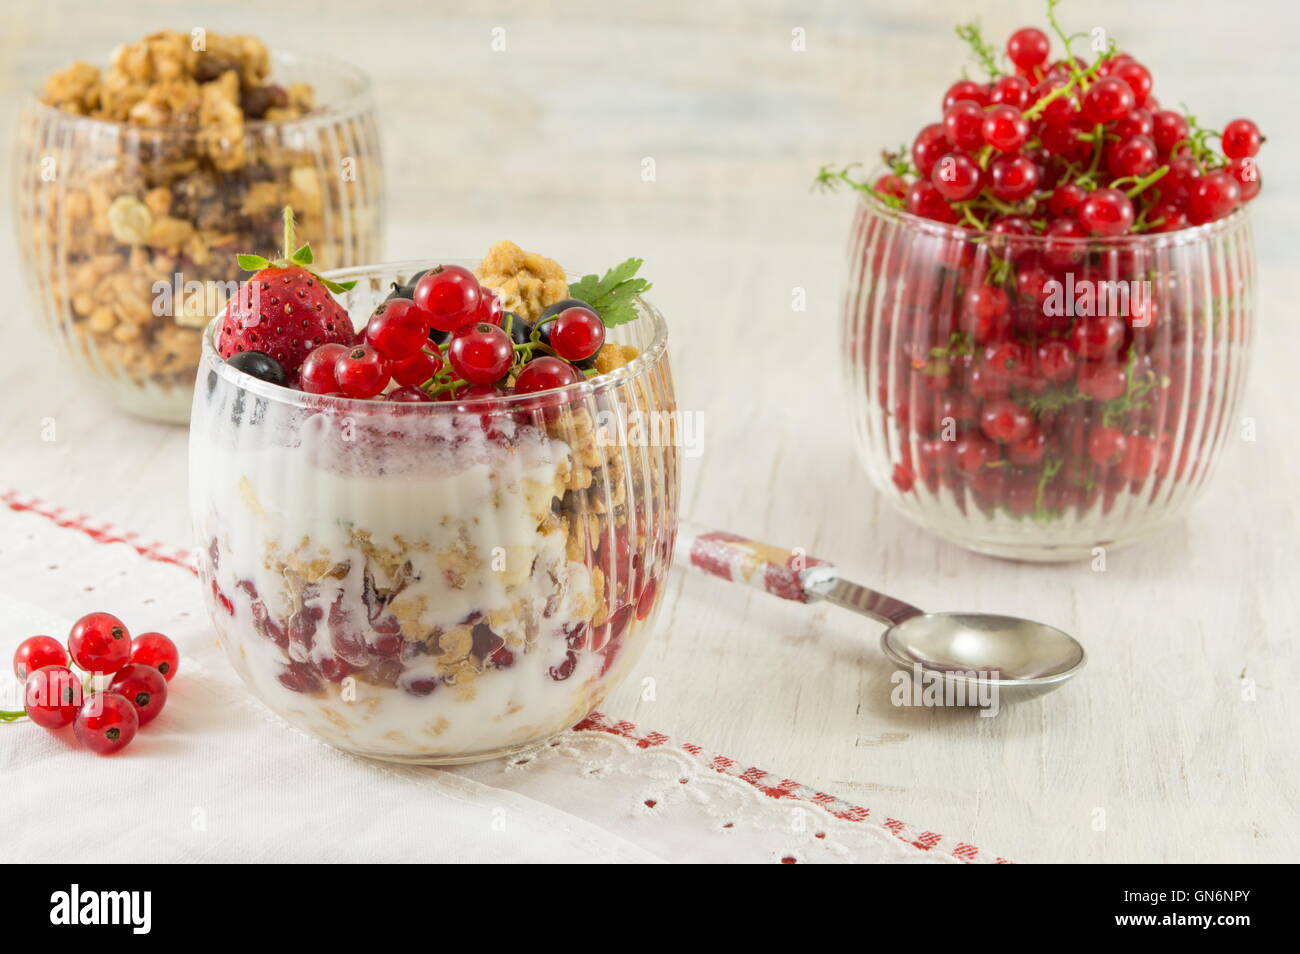 Granola parfait with berry fruit and cream. Healthy dessert Stock Photo